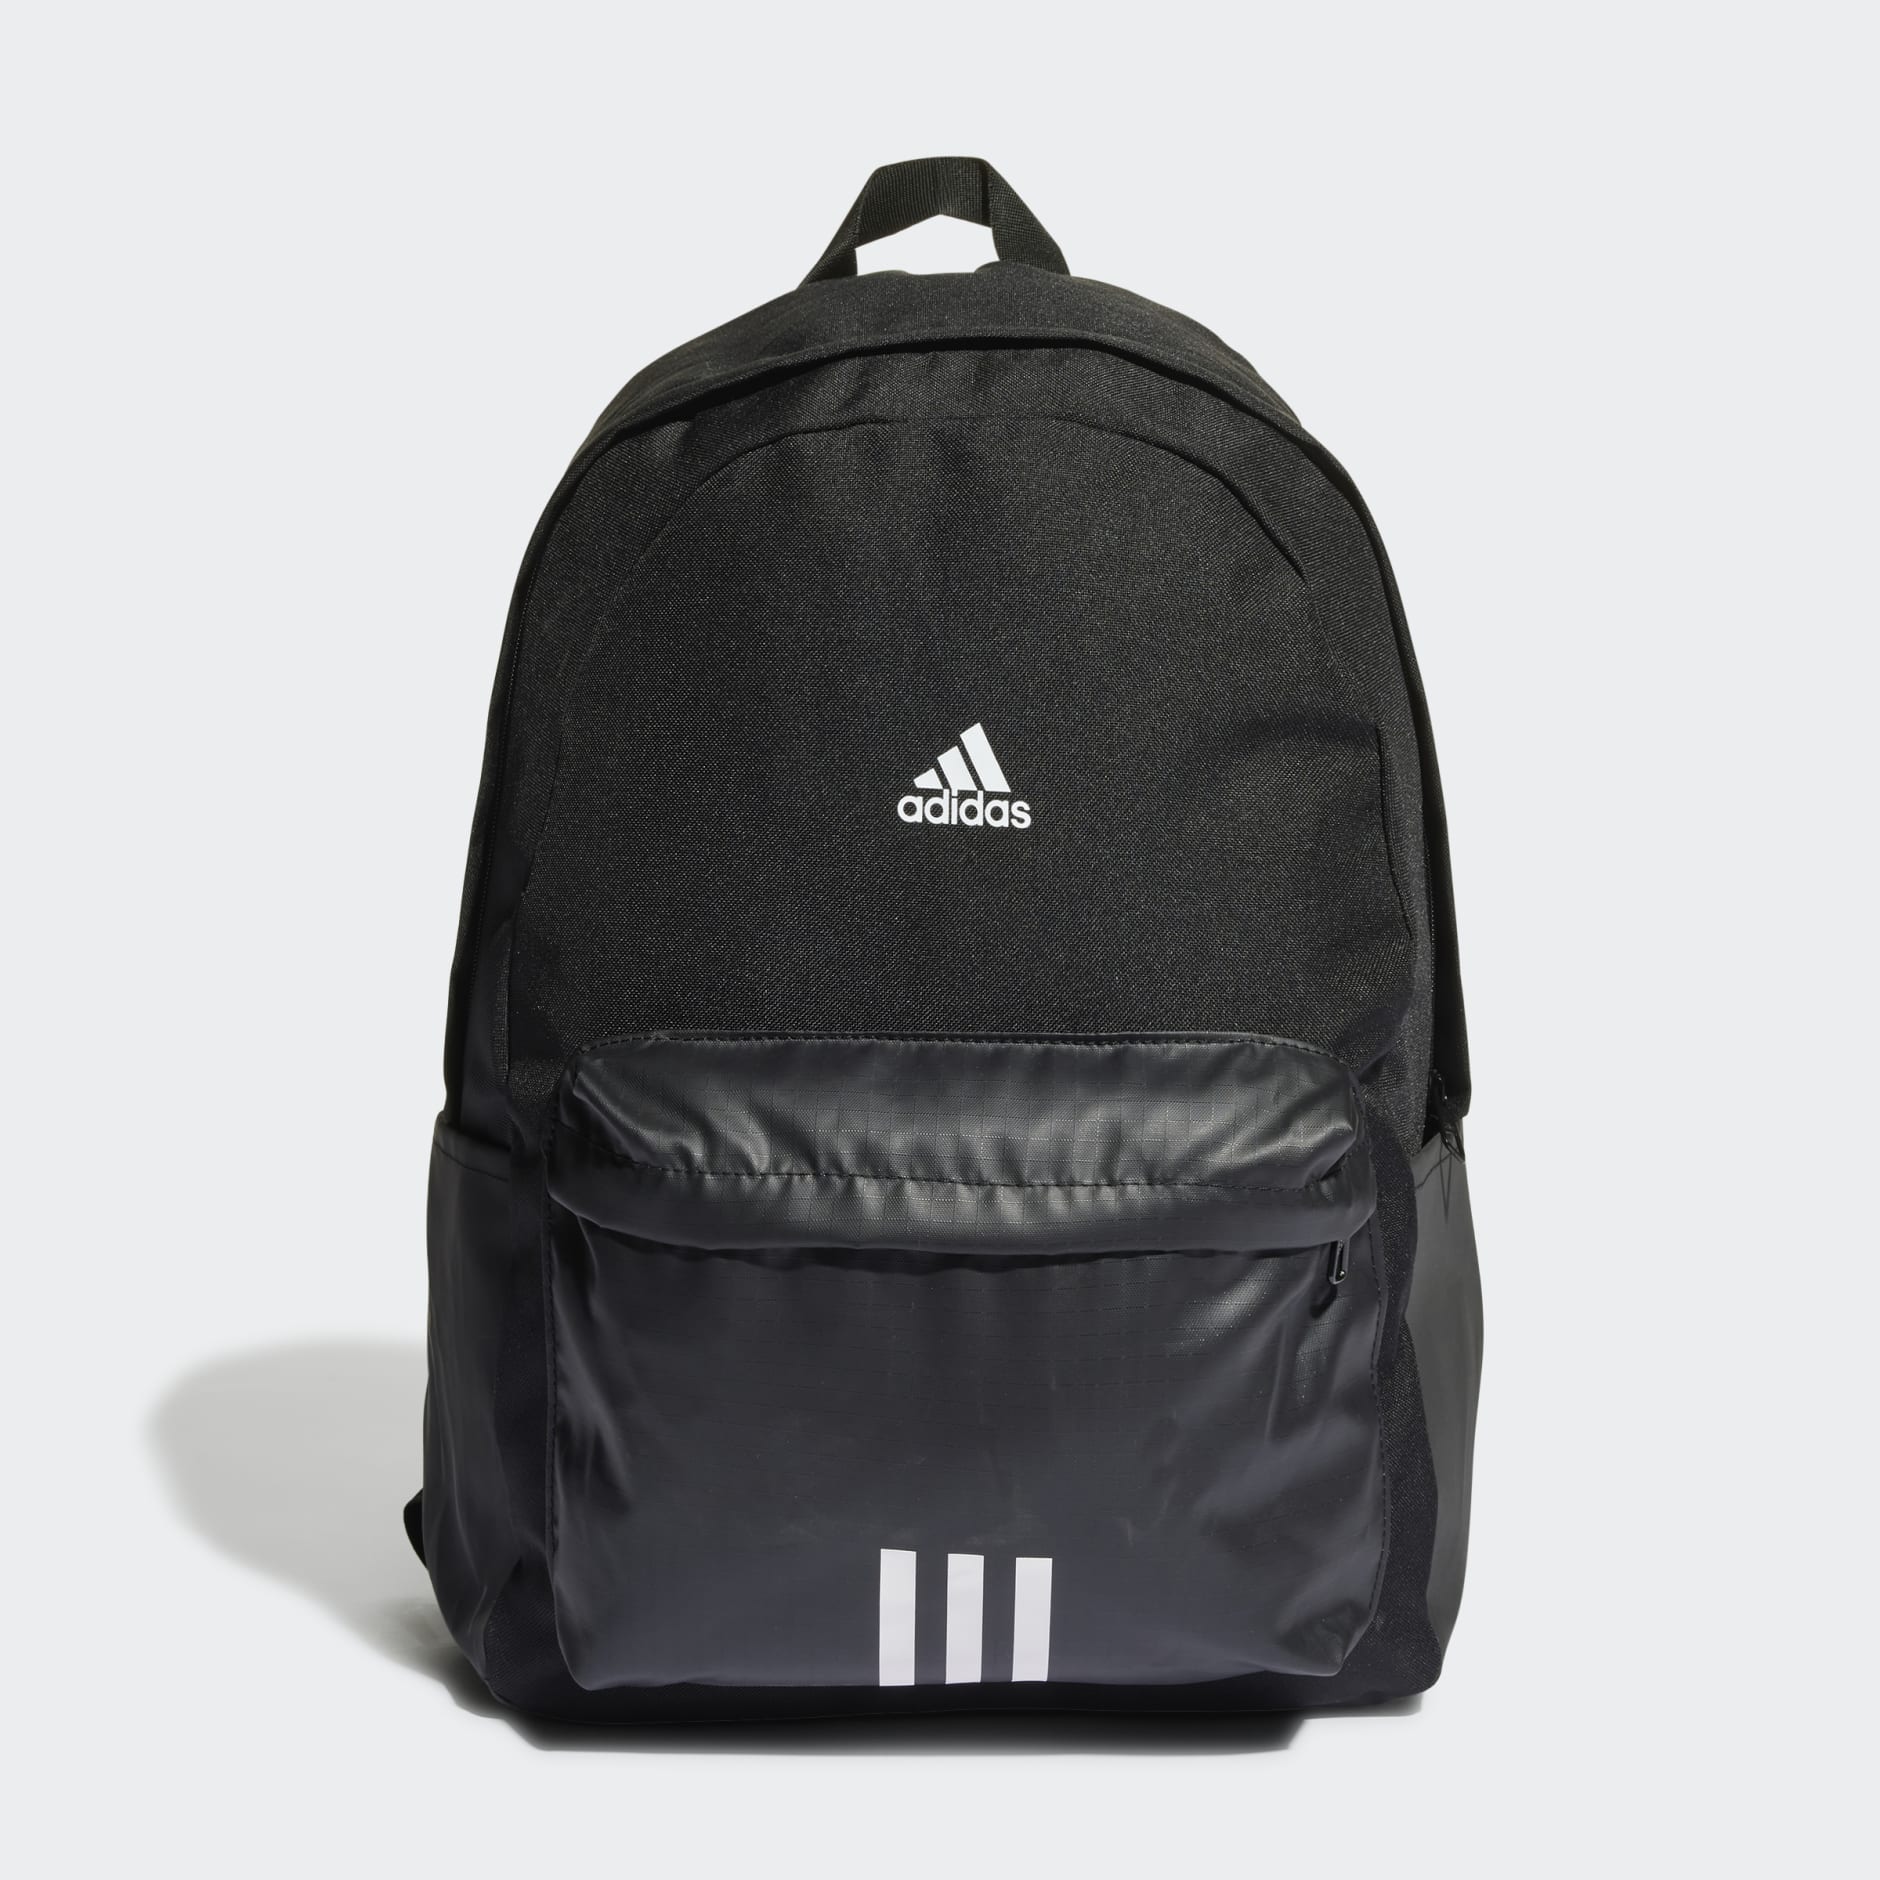 Accessories - Classic Badge of Sport 3-Stripes Backpack - Black ...